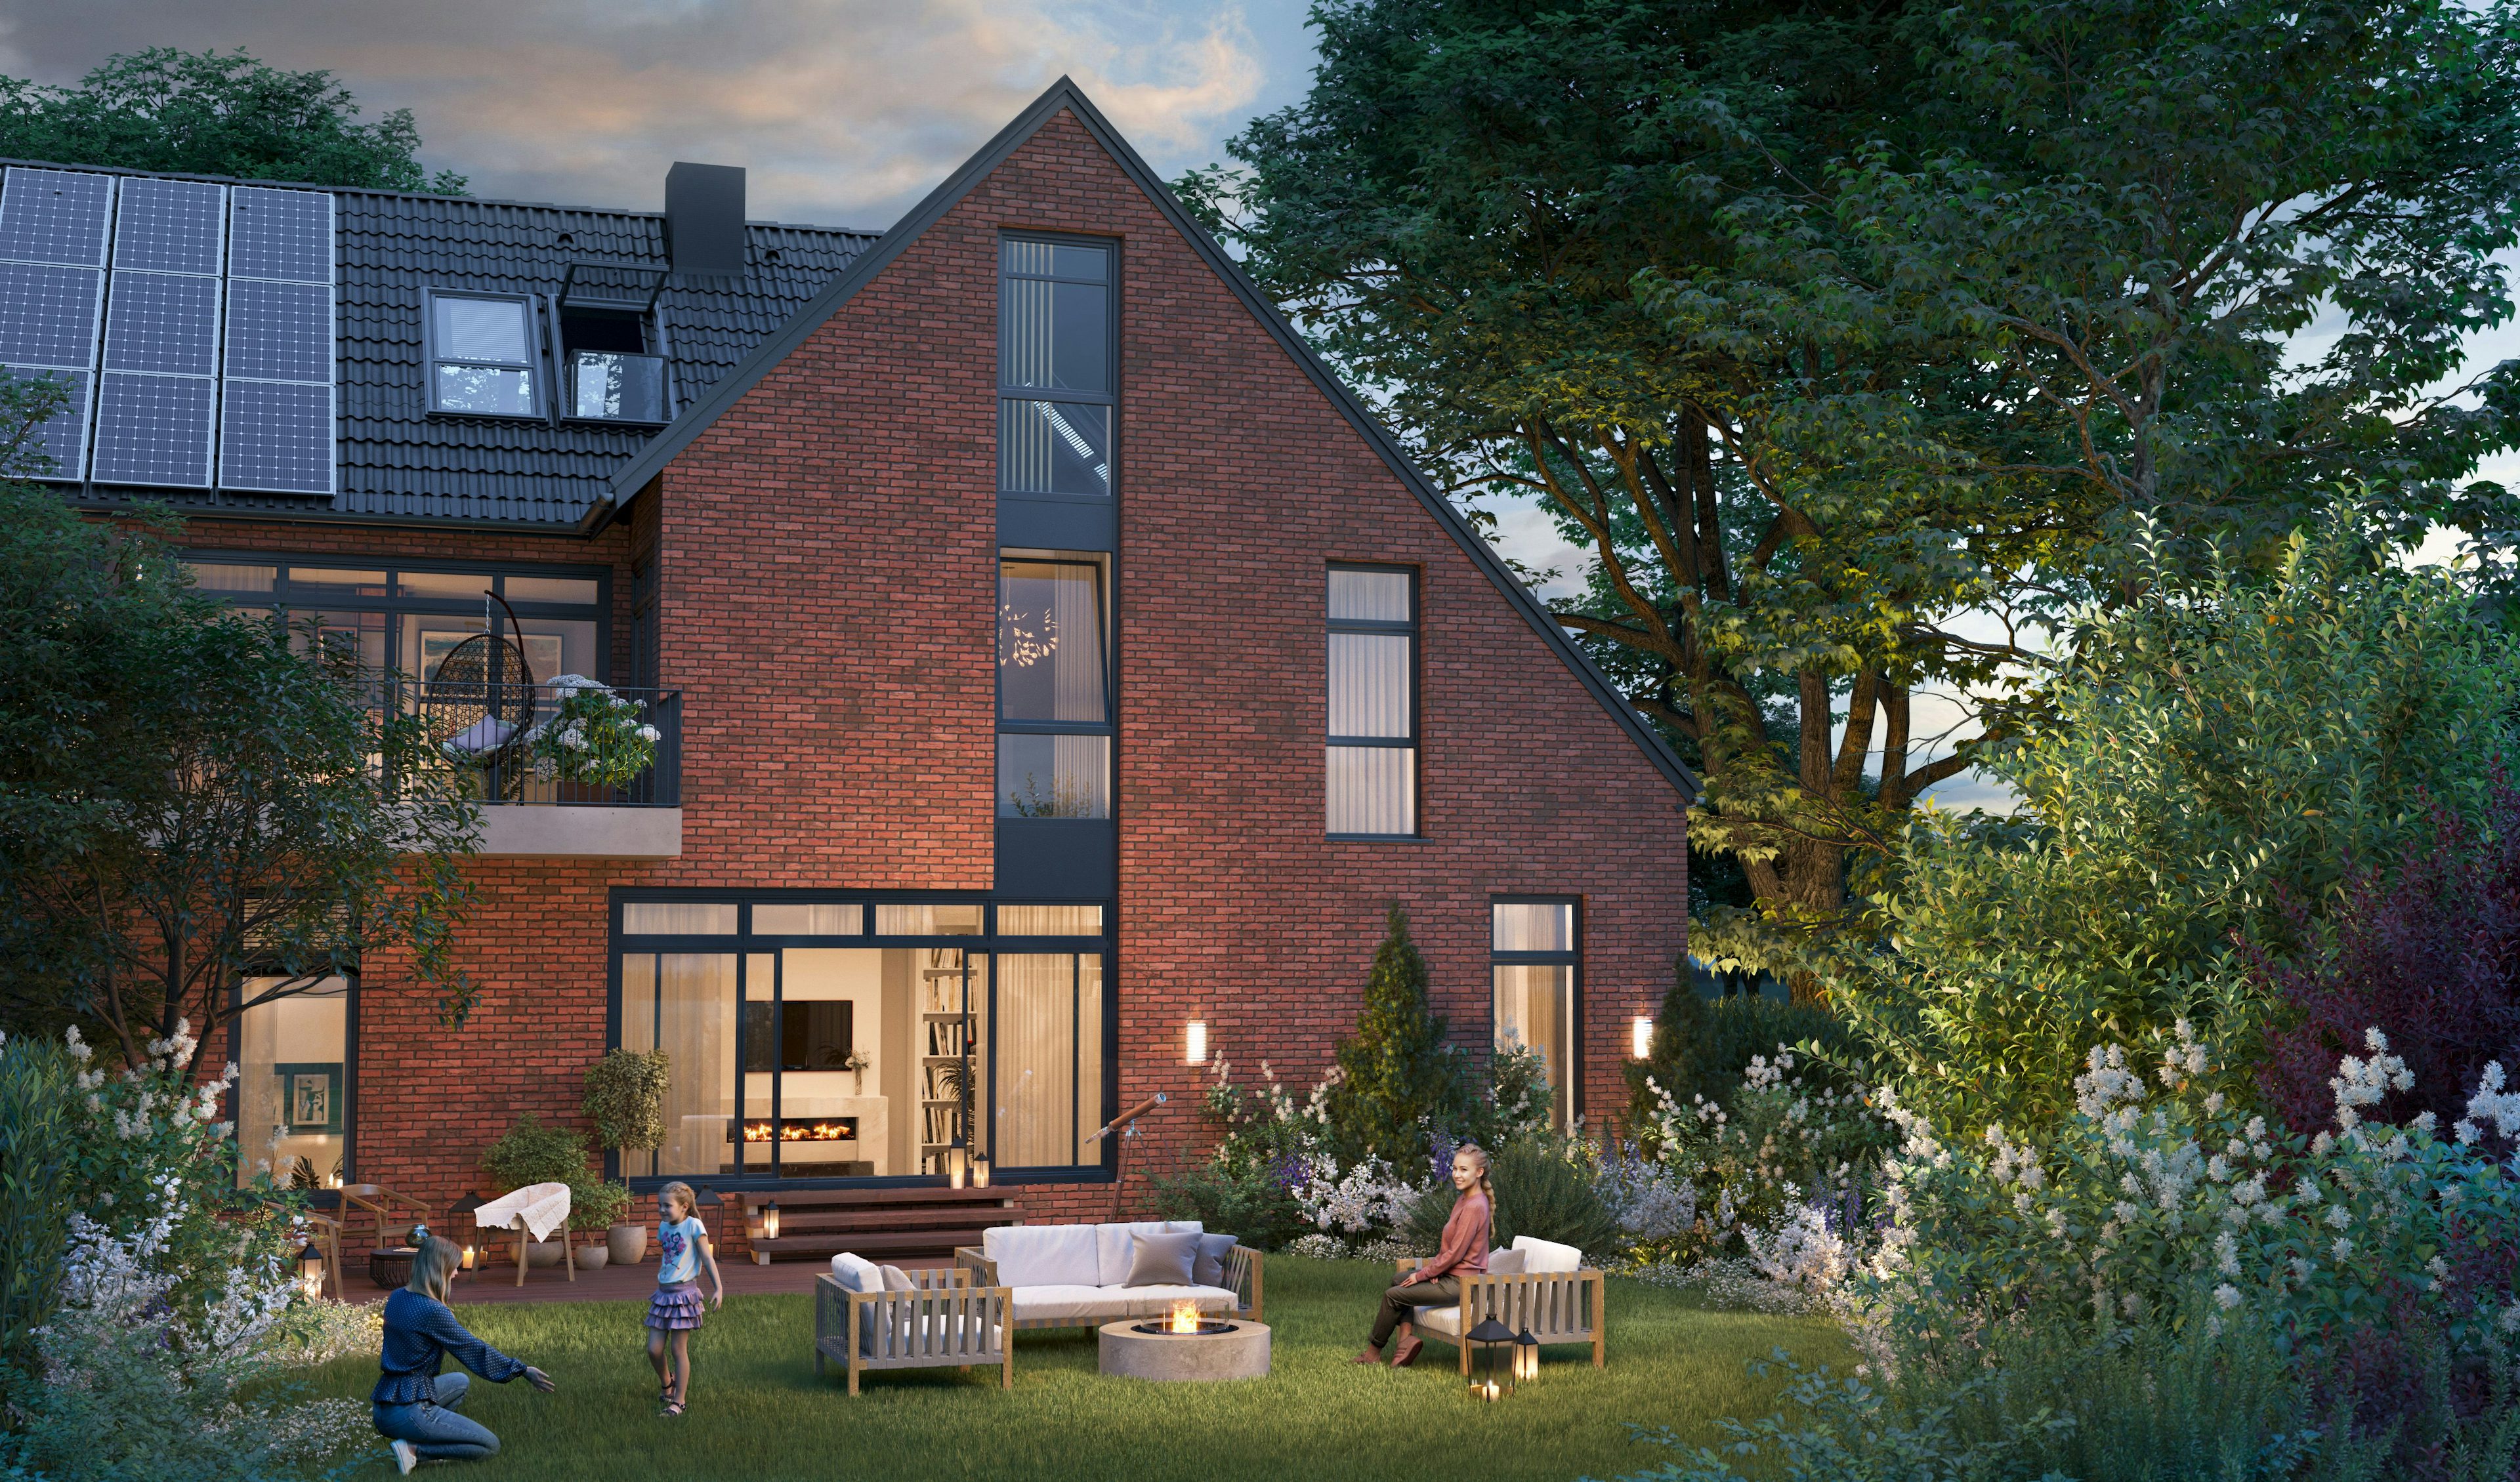 3D Exterior Visualization of a one half family house with a garden, Hamburg Germany